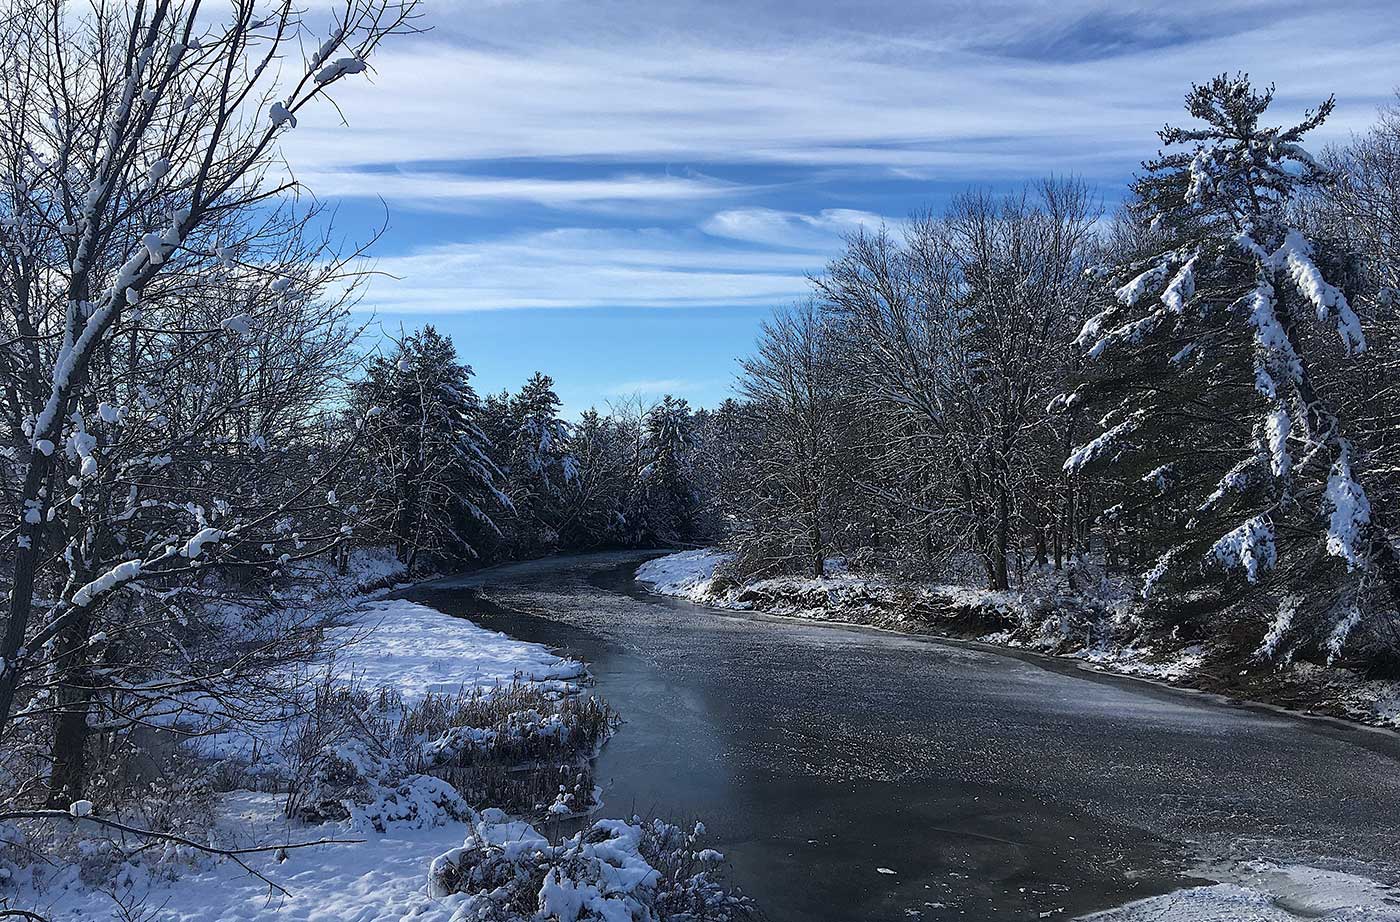 view of Sheepscot River with snow-covered trees lining it